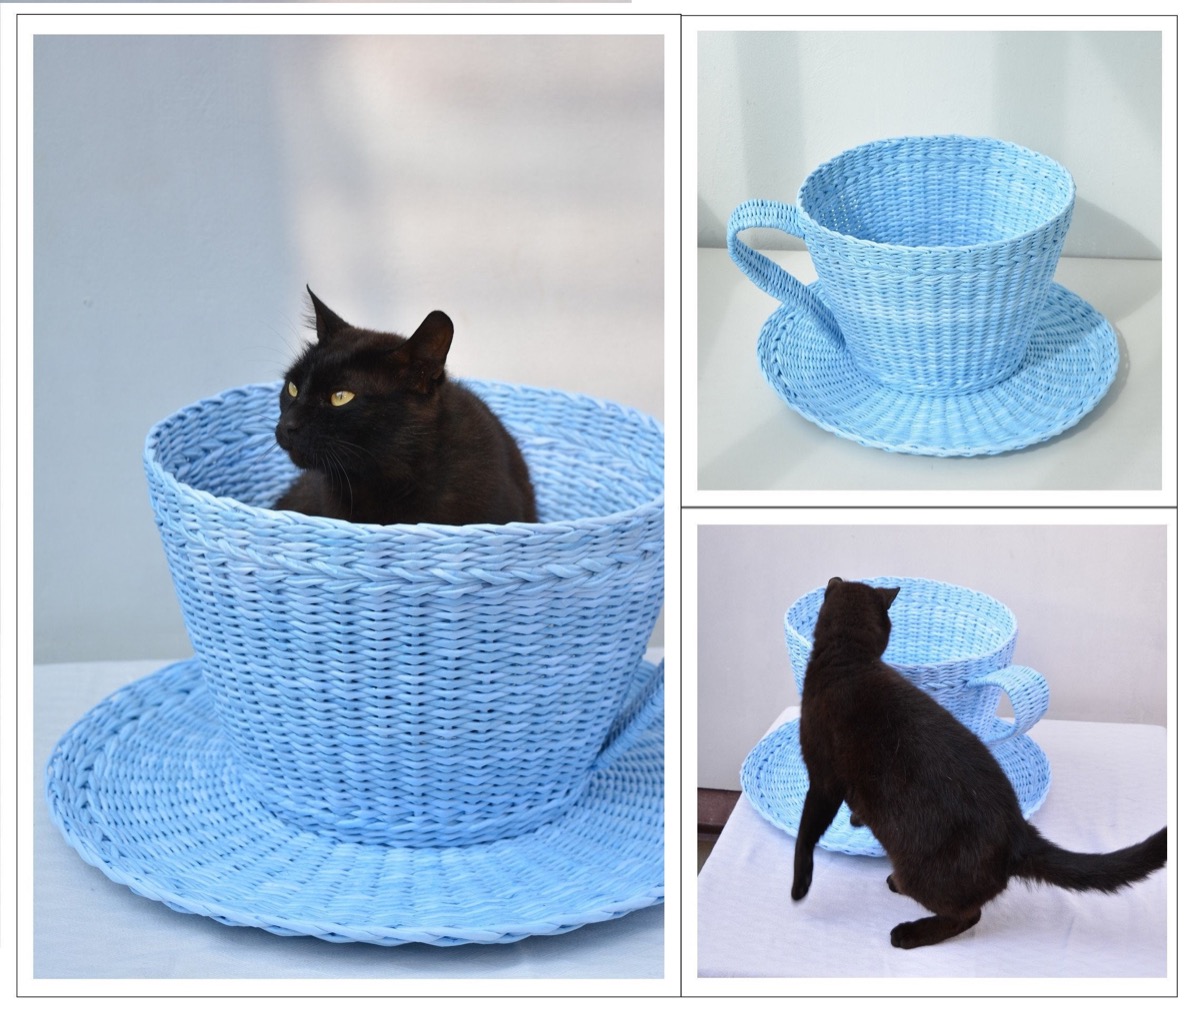 black cat in blue woven teacup, cat playground